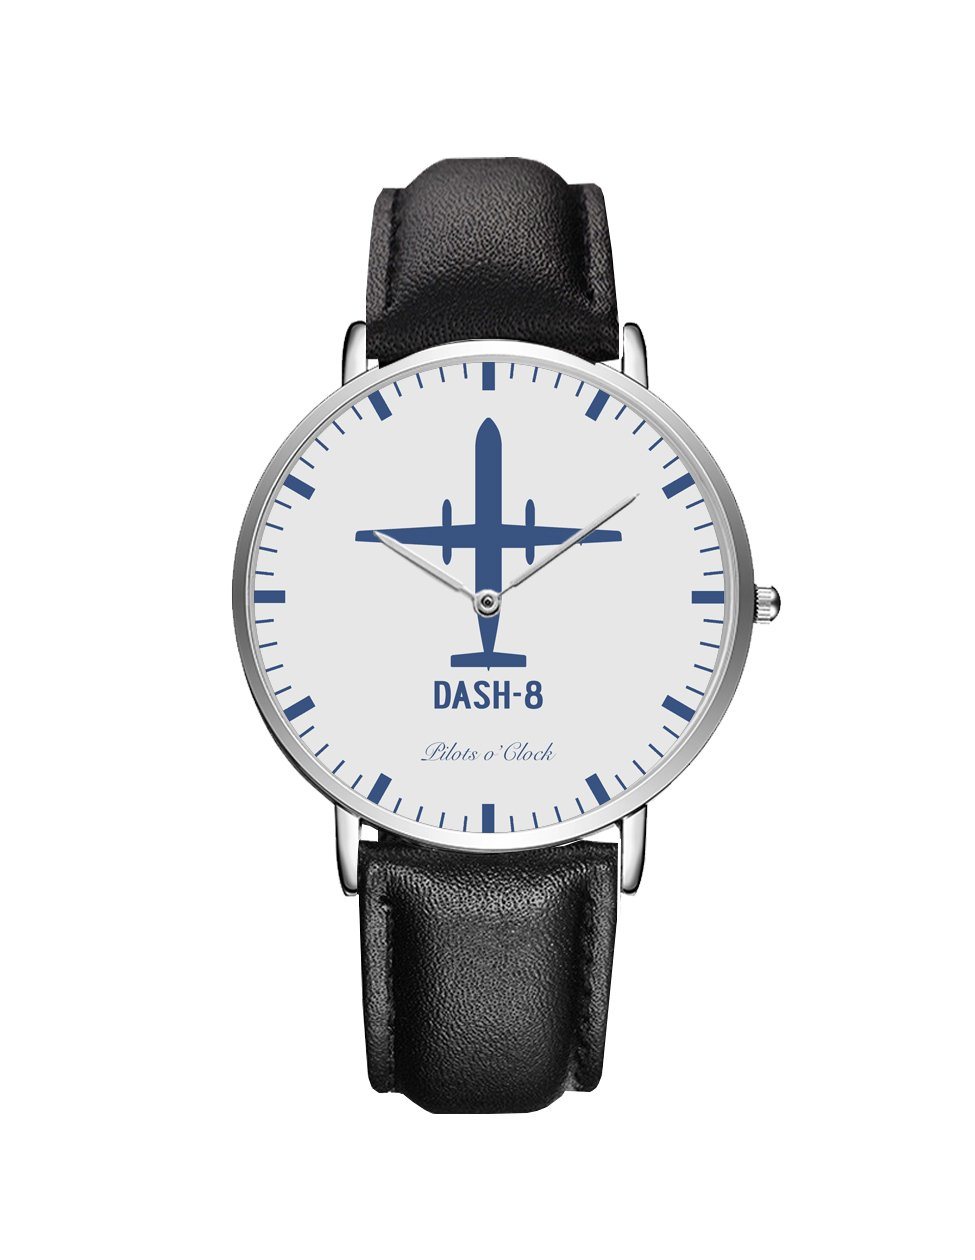 Bombardier Dash-8 Leather Strap Watches Pilot Eyes Store Silver & Black Leather Strap 